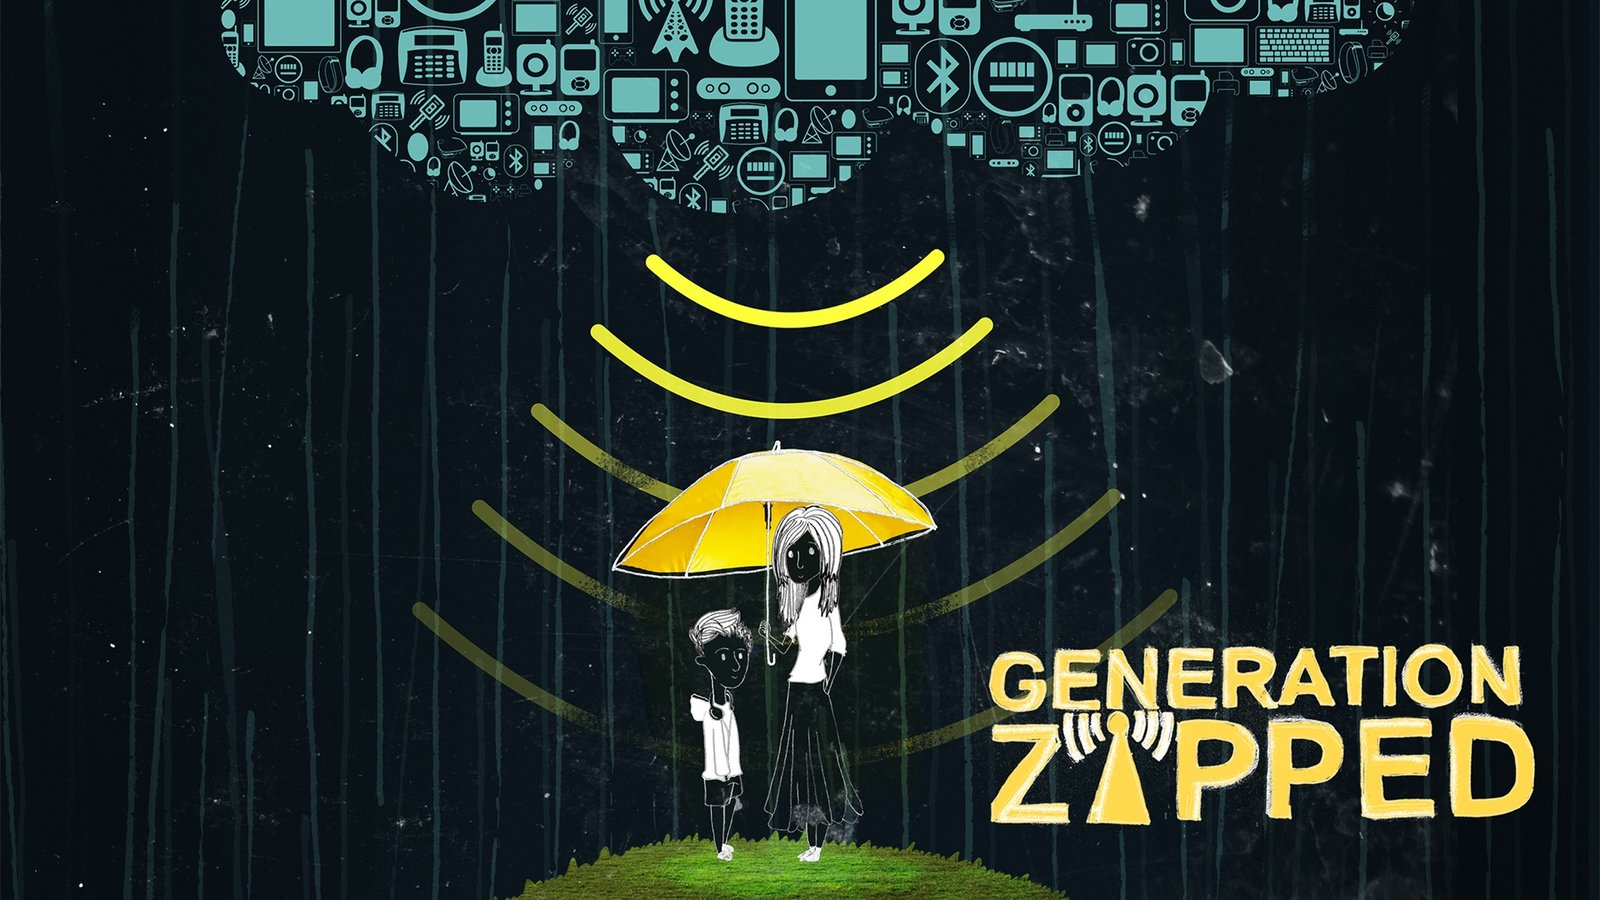 Generation Zapped - The Dangers of Daily Exposure to Wireless Technologies